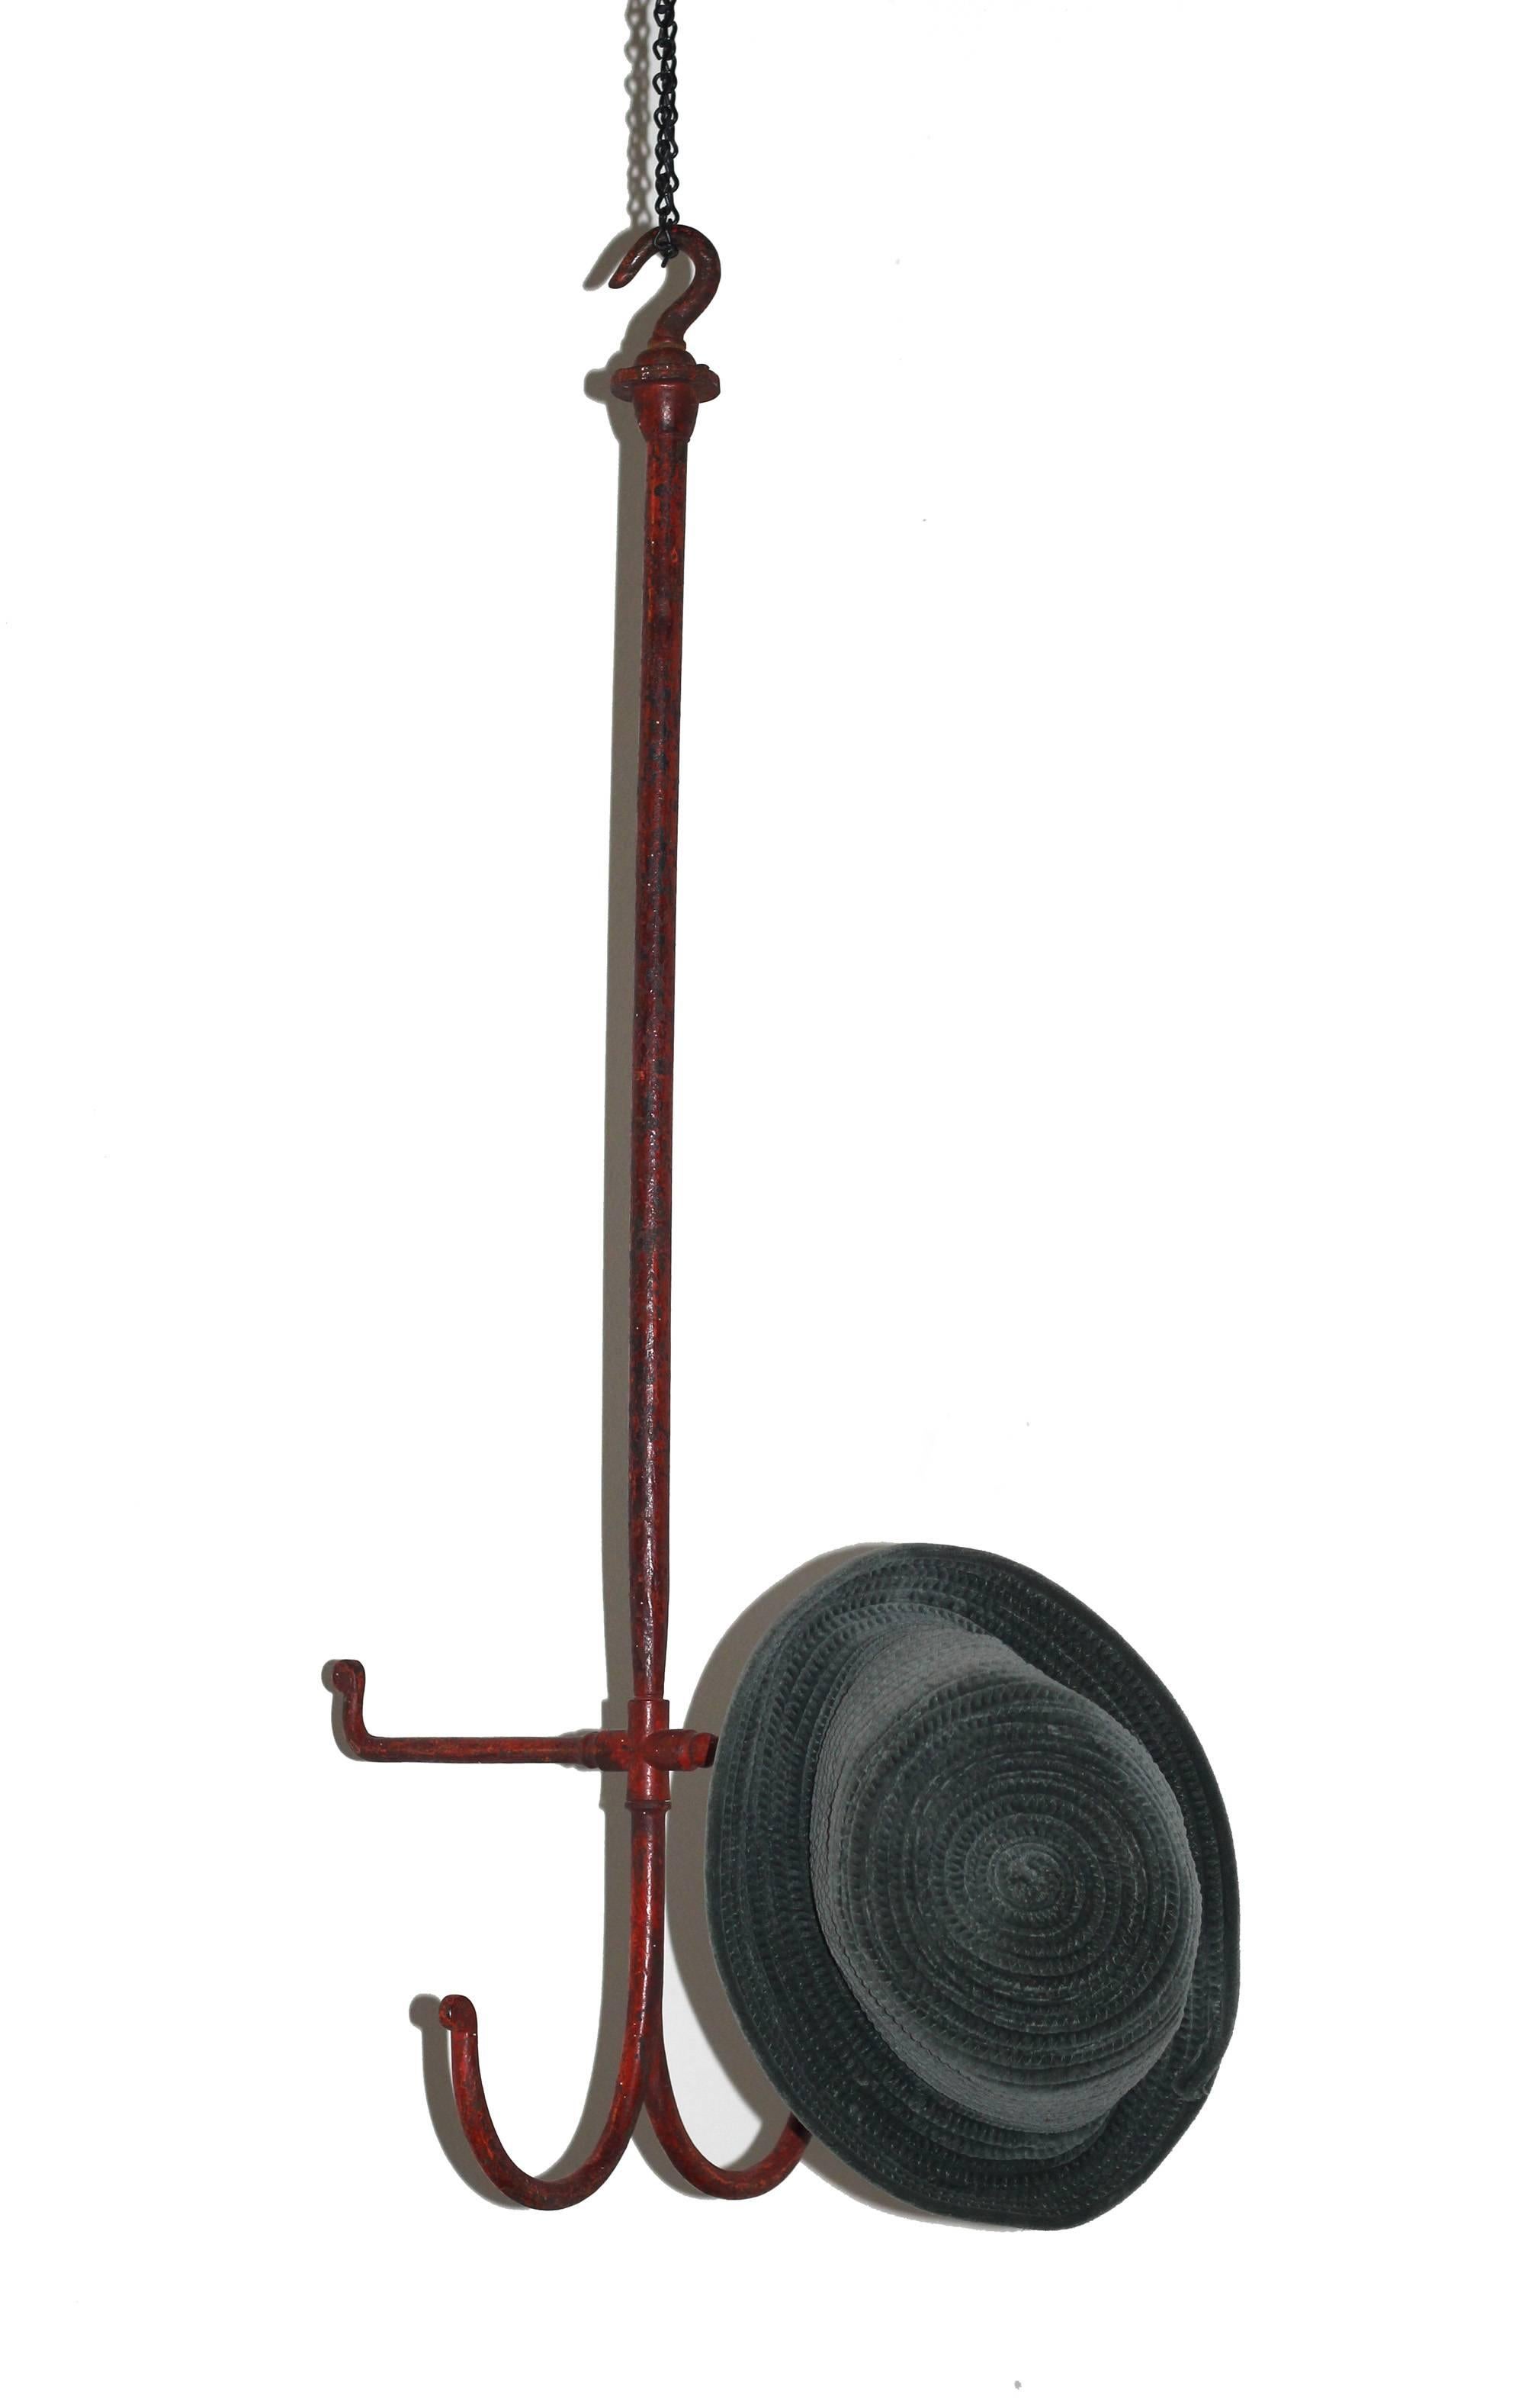 Great-looking, tall, very strong and versatile painted iron hanging hooks, originally a harness holder in a stable. Three dimensional and very well made. This would work well to hang a variety of things in a hallway, kitchen (heavy pots and pans) or